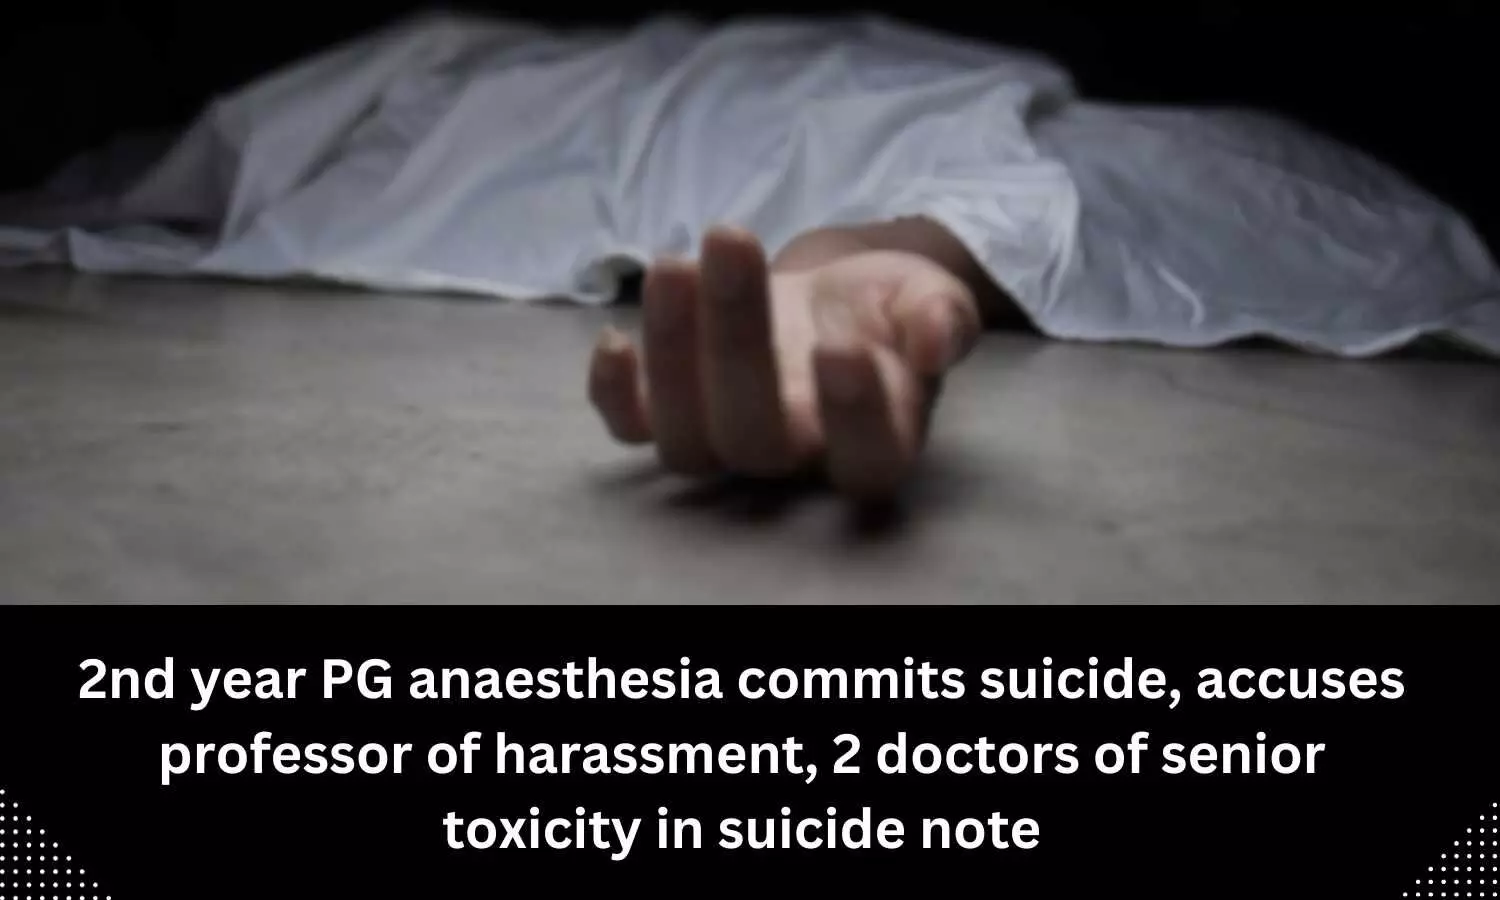 PG anesthesiology student commits suicide